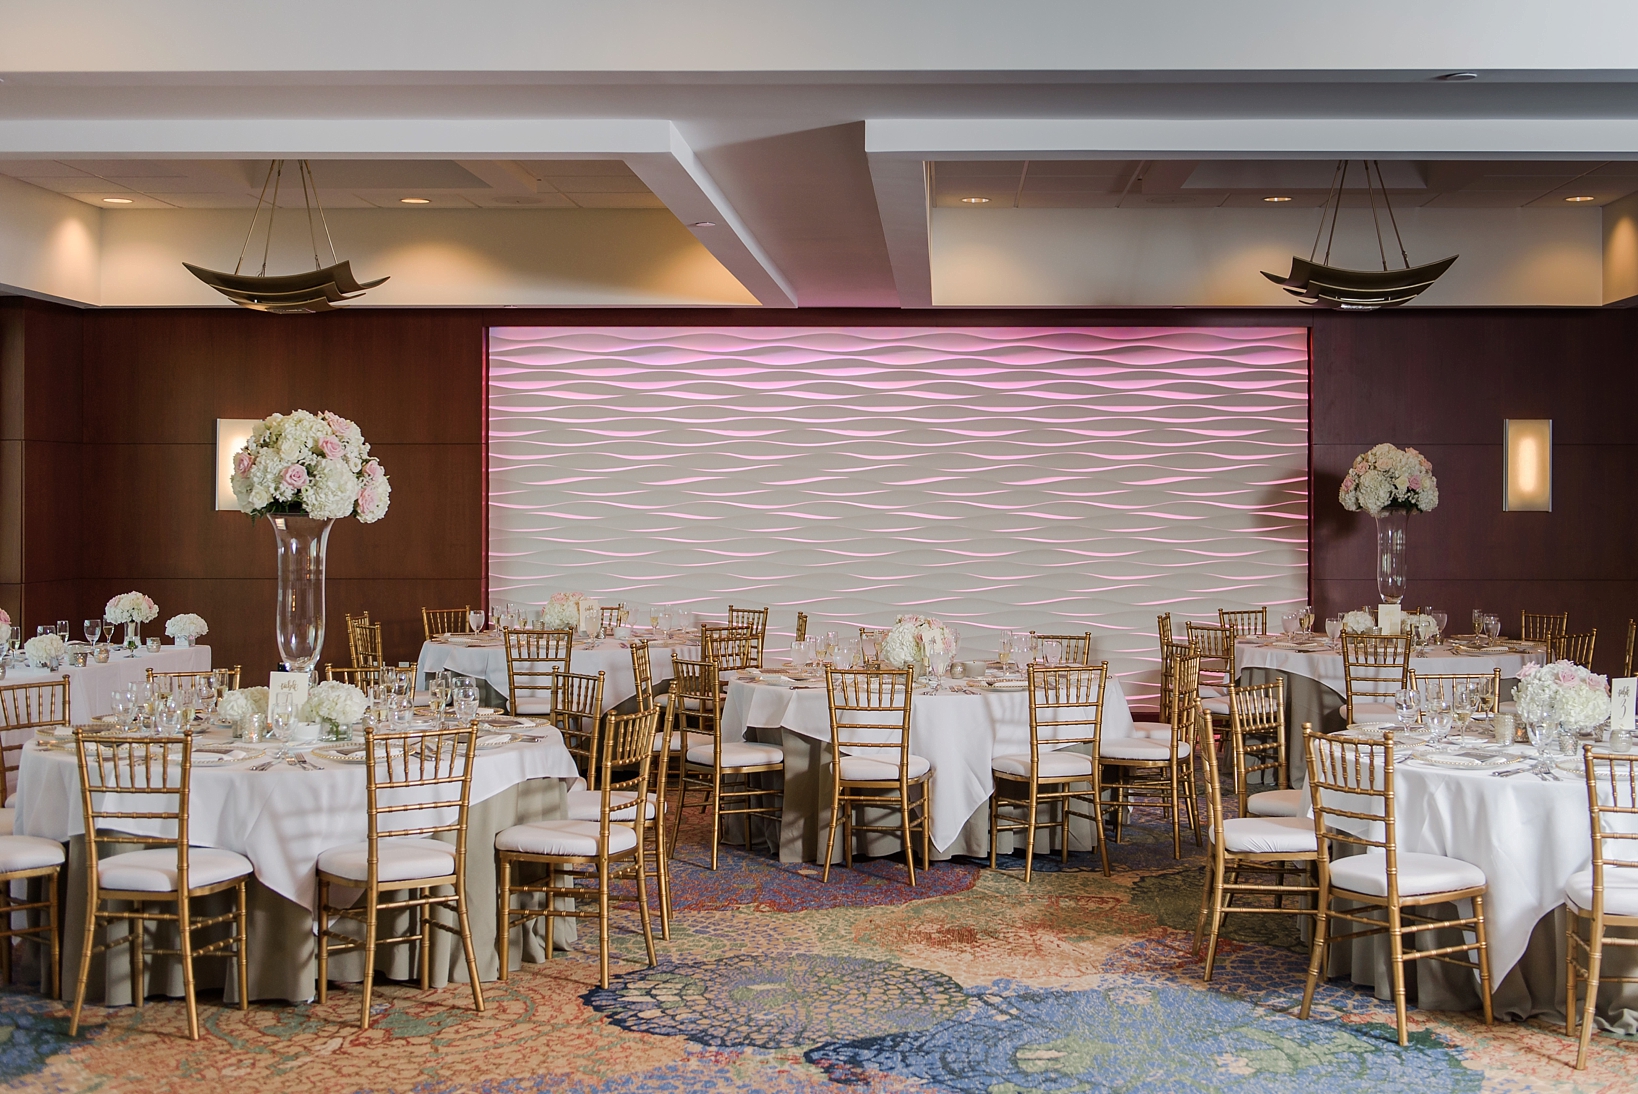 Reception space at the westin Tampa bay with a mix of high and low floral centerpices by Sarah & Ben Photography